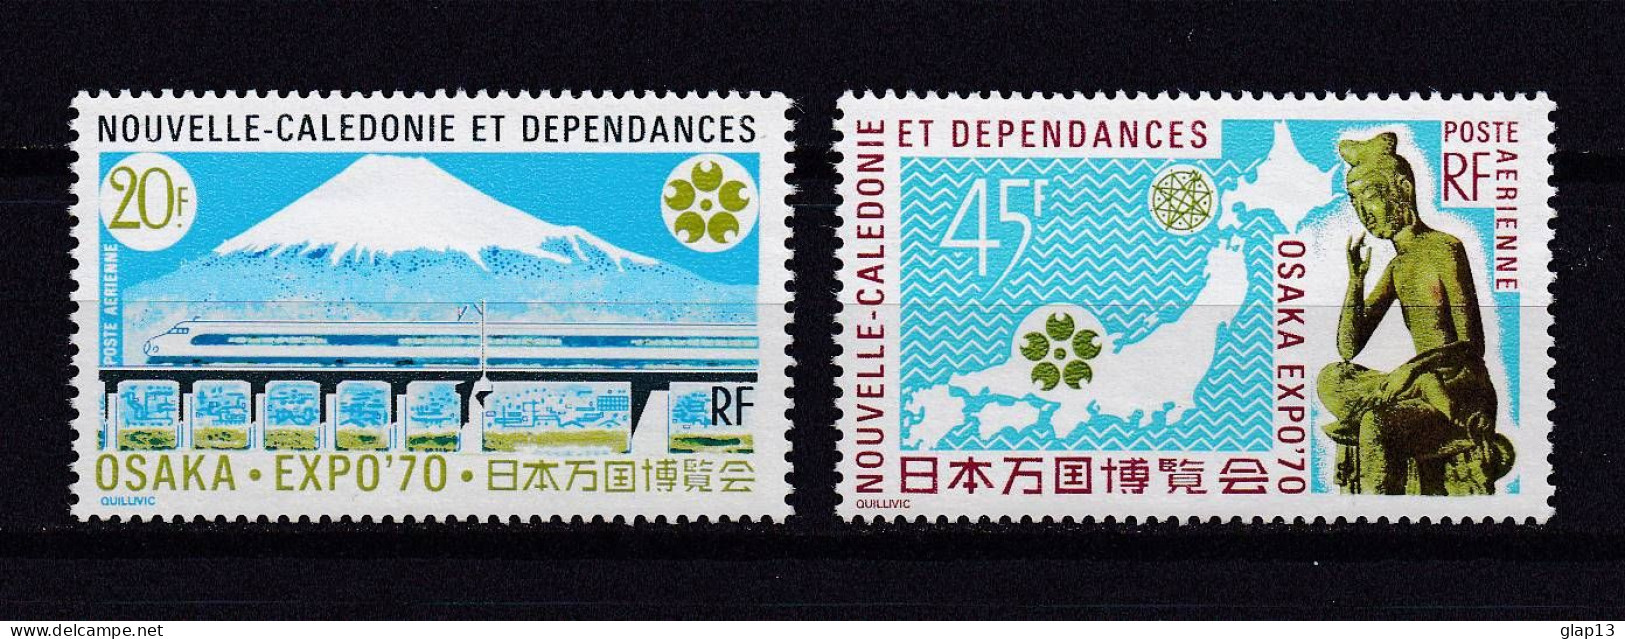 NOUVELLE-CALEDONIE 1970 PA N°117/18 NEUF** EXPOSITION - Usados